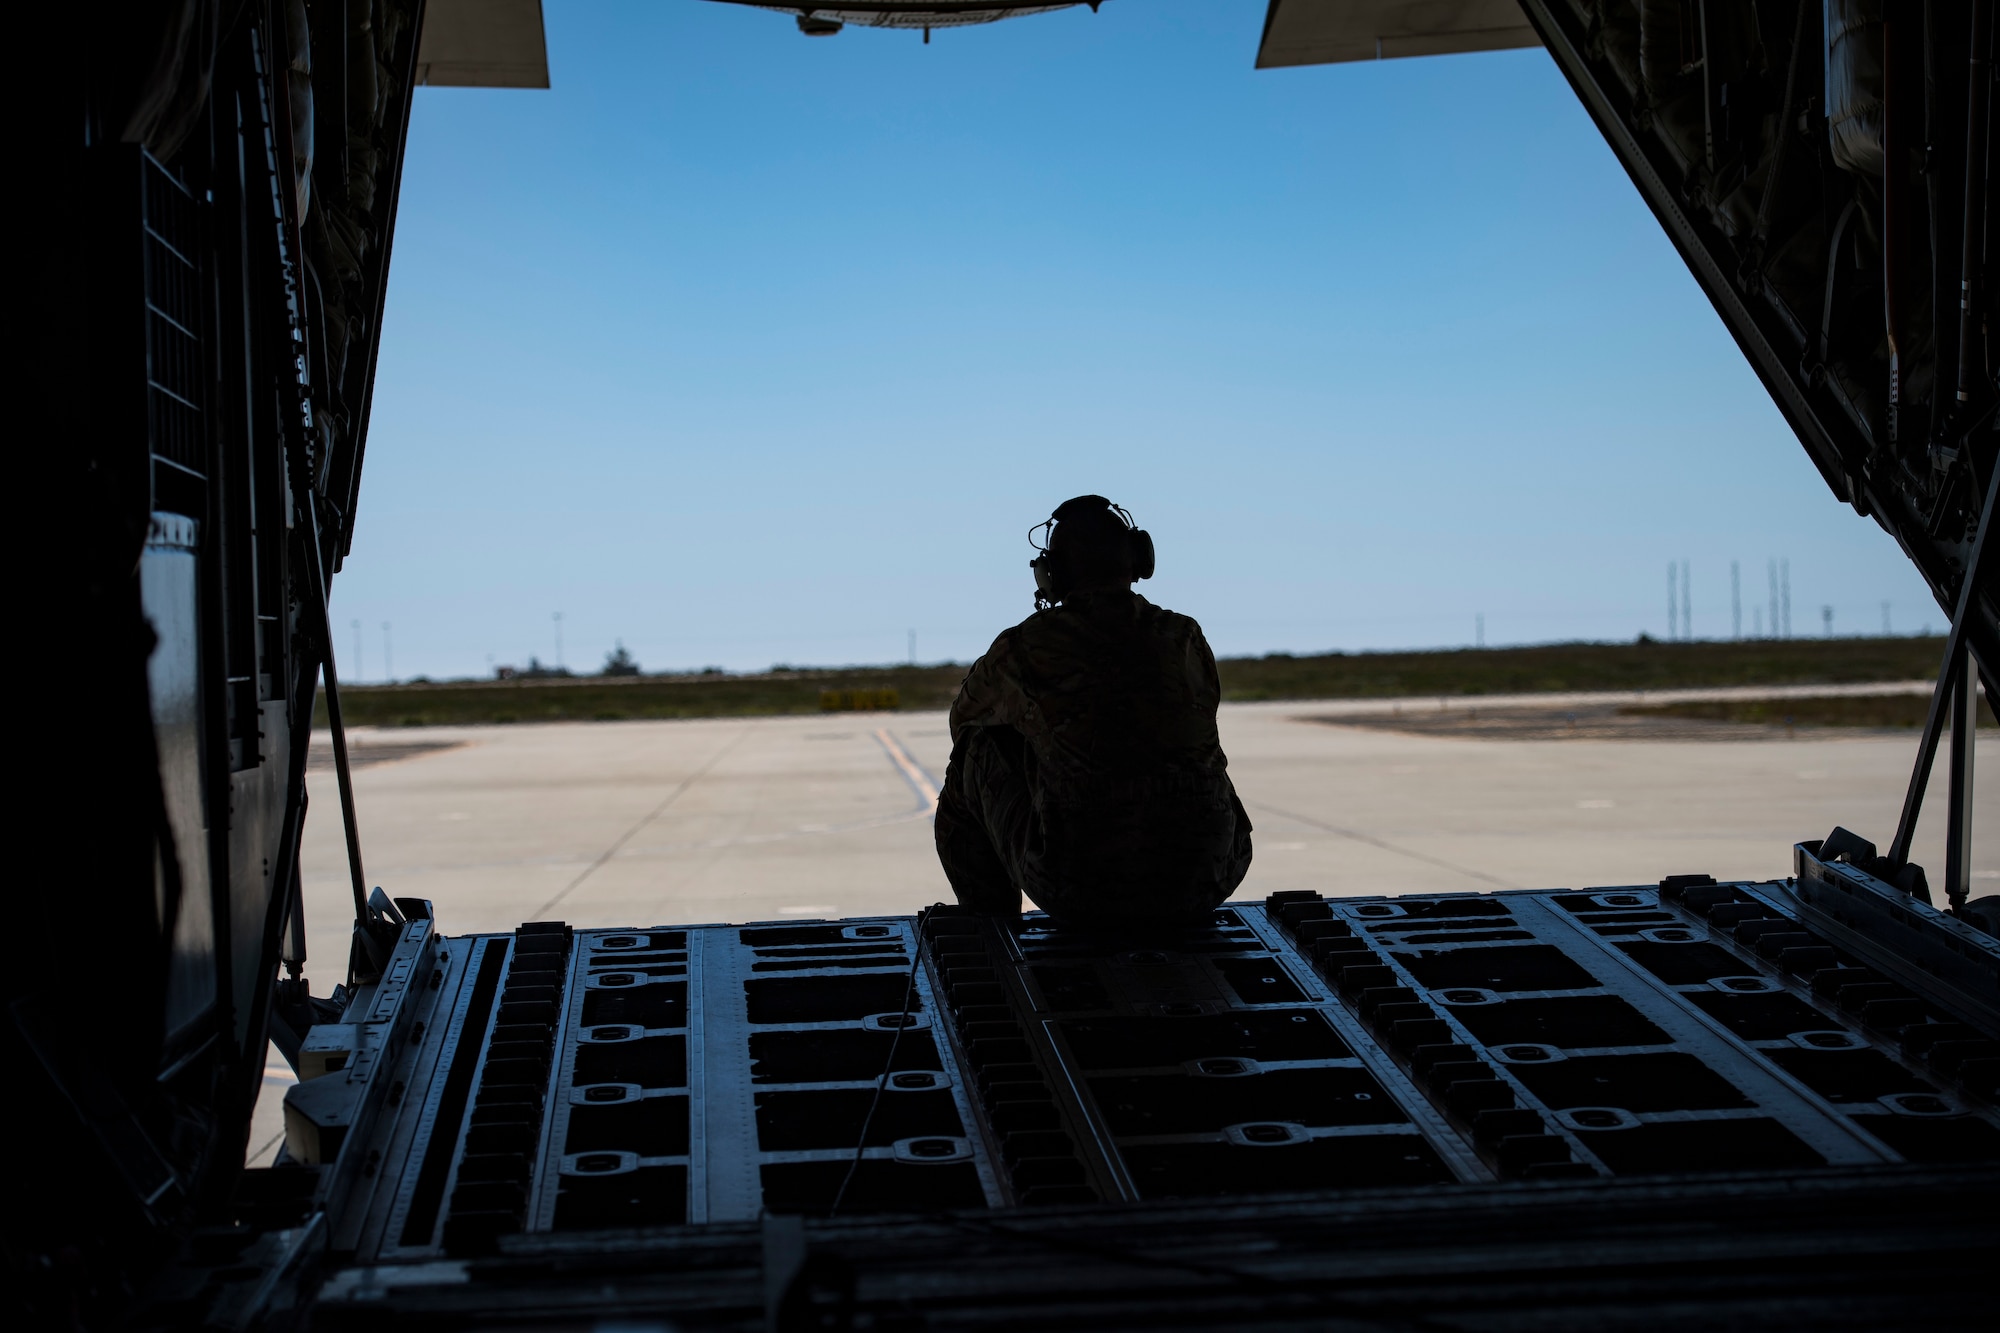 Tech. Sgt. Brandon Garbrick, 71st Rescue Squadron HC-130J Combat King II loadmaster, sits on the ramp of an HC-130J during Tiger Rescue IV, March 27, 2018, at Vandenberg Air Force Base, Calif. The four-day exercise challenged Airmen from multiple rescue squadrons to bring the capabilities of the personnel recovery triad together to successfully complete rescue missions and maintain proficiency. The three branches of the personnel recovery triad are the HC-130J, HH-60G Pave Hawk and the guardian angel weapons system or pararescuemen. (U.S. Air Force photo by Senior Airman Janiqua P. Robinson)